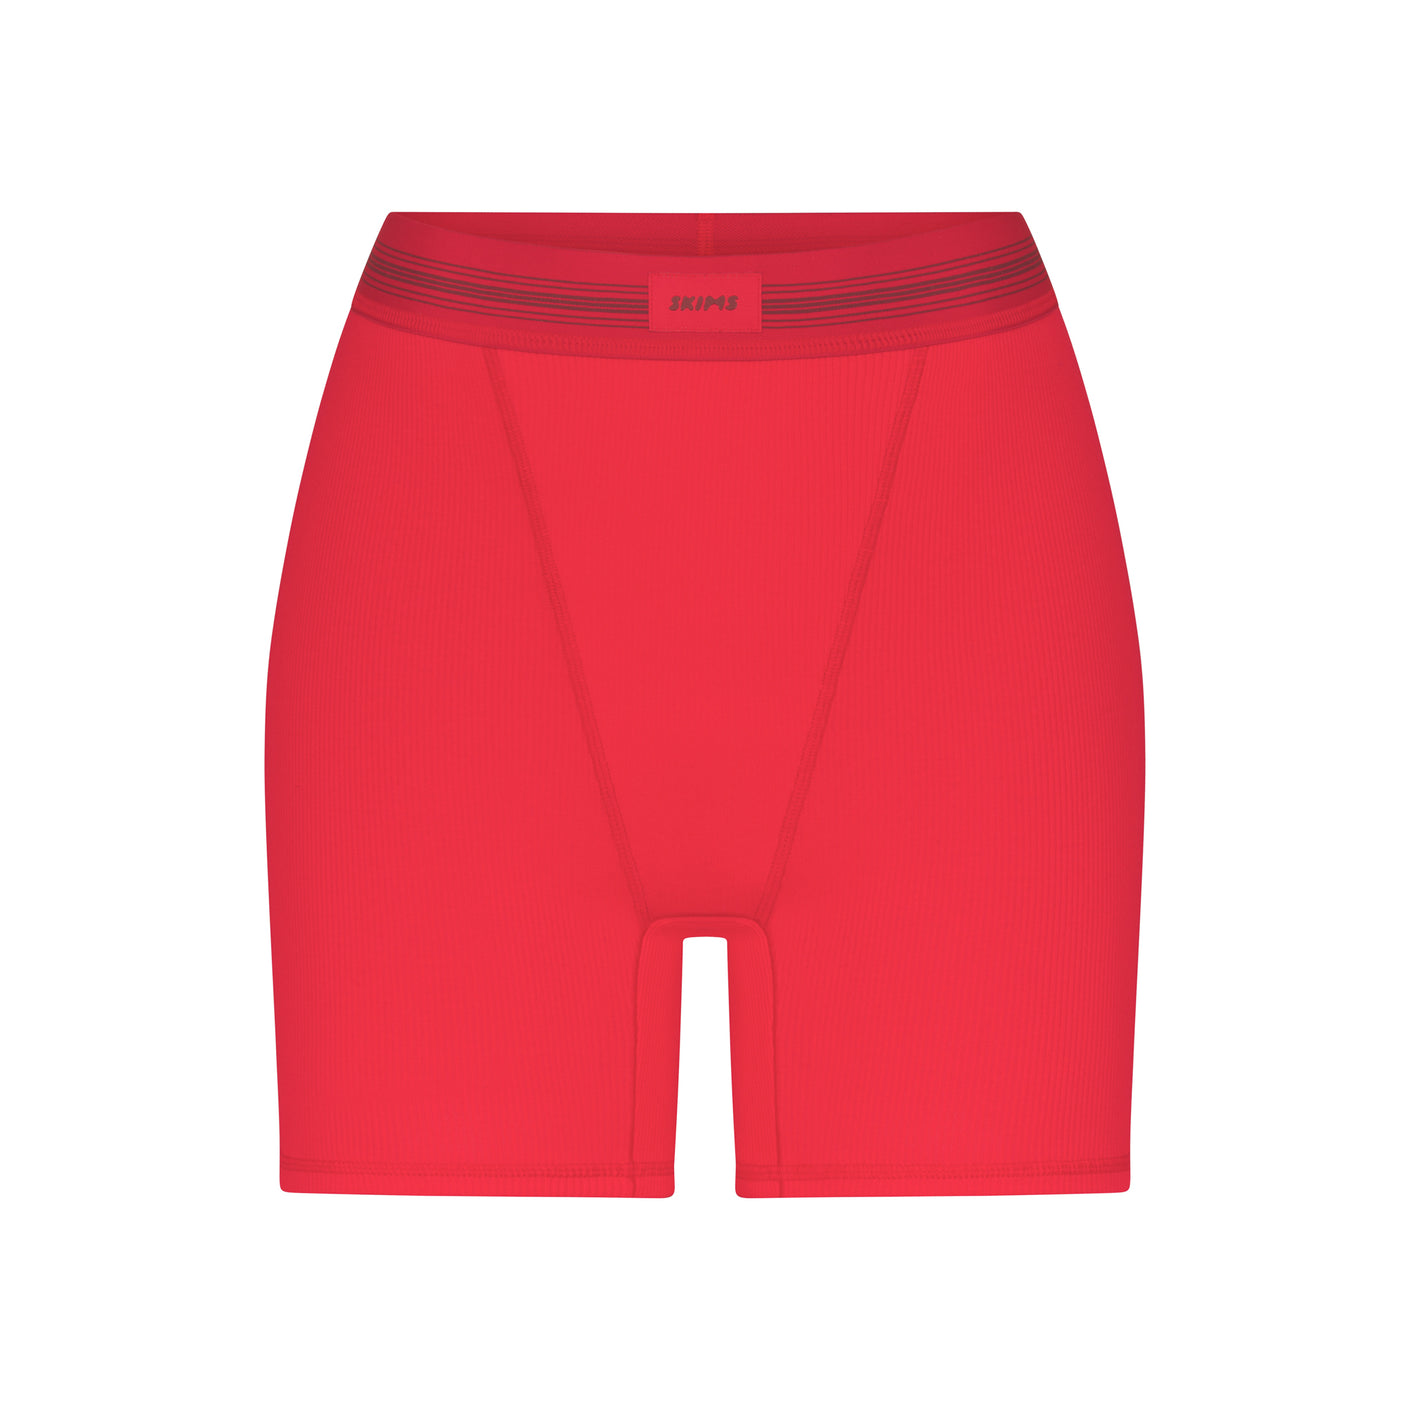 Womens Skims red Cotton Ribbed Boxer Shorts